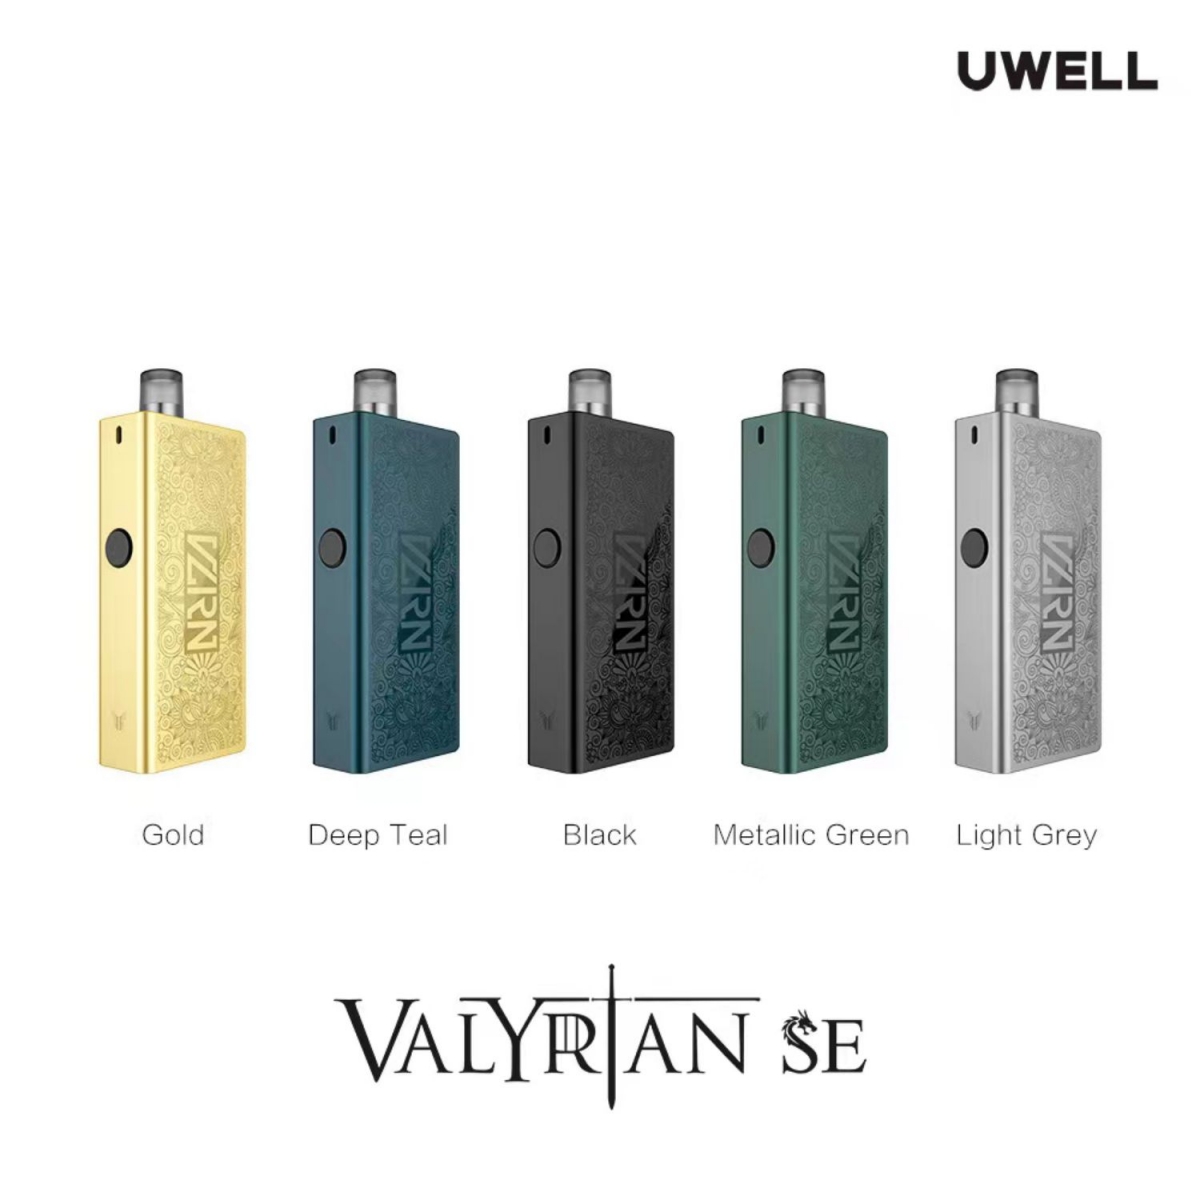 UWELL VALYRIAN SE POD review